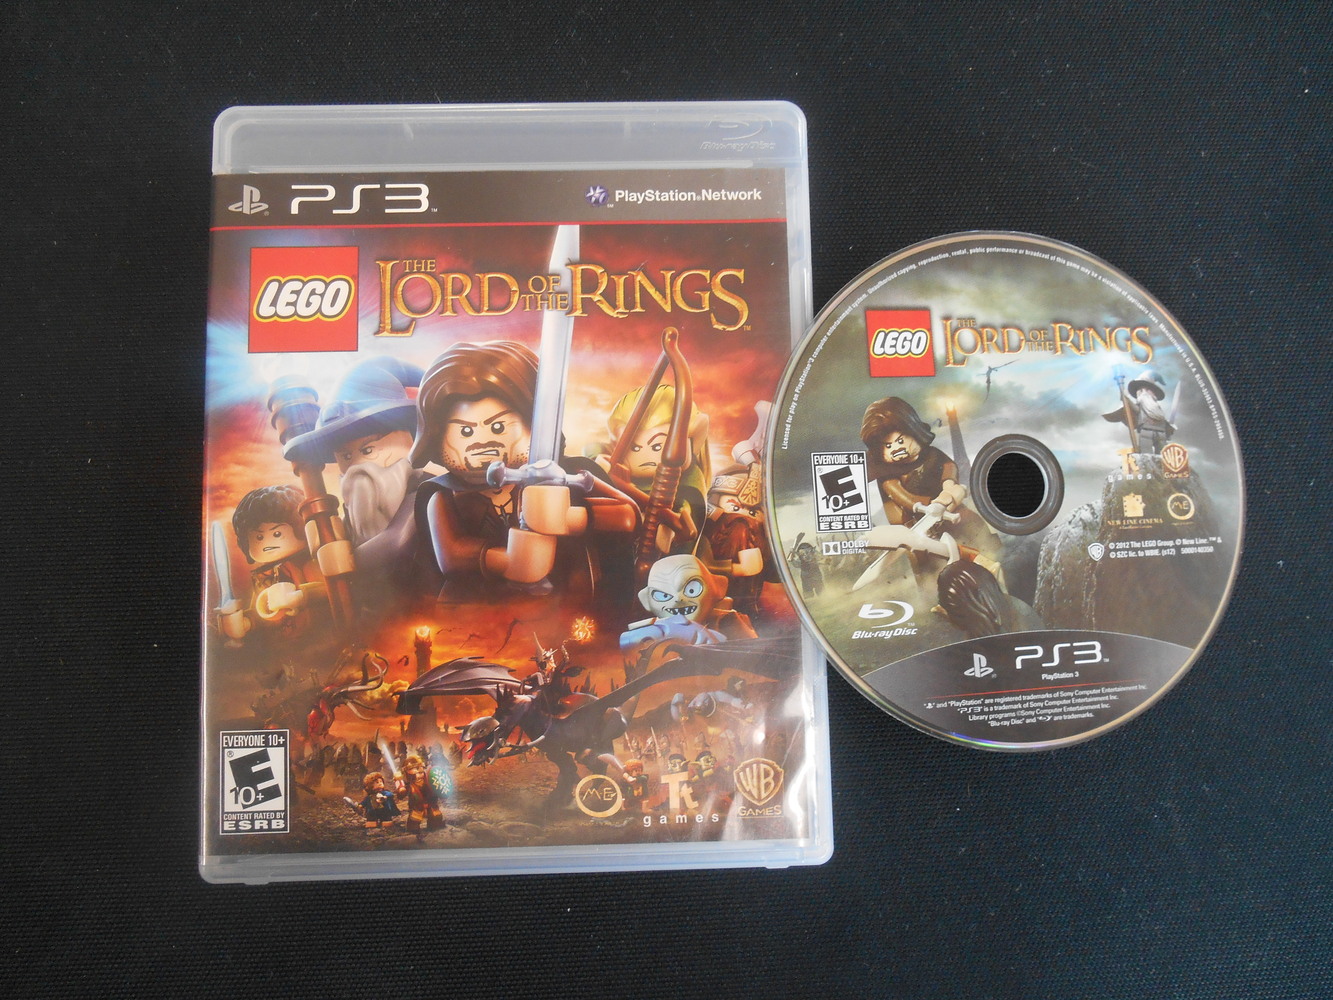  LEGO The Lord of the Rings - PlayStation 3